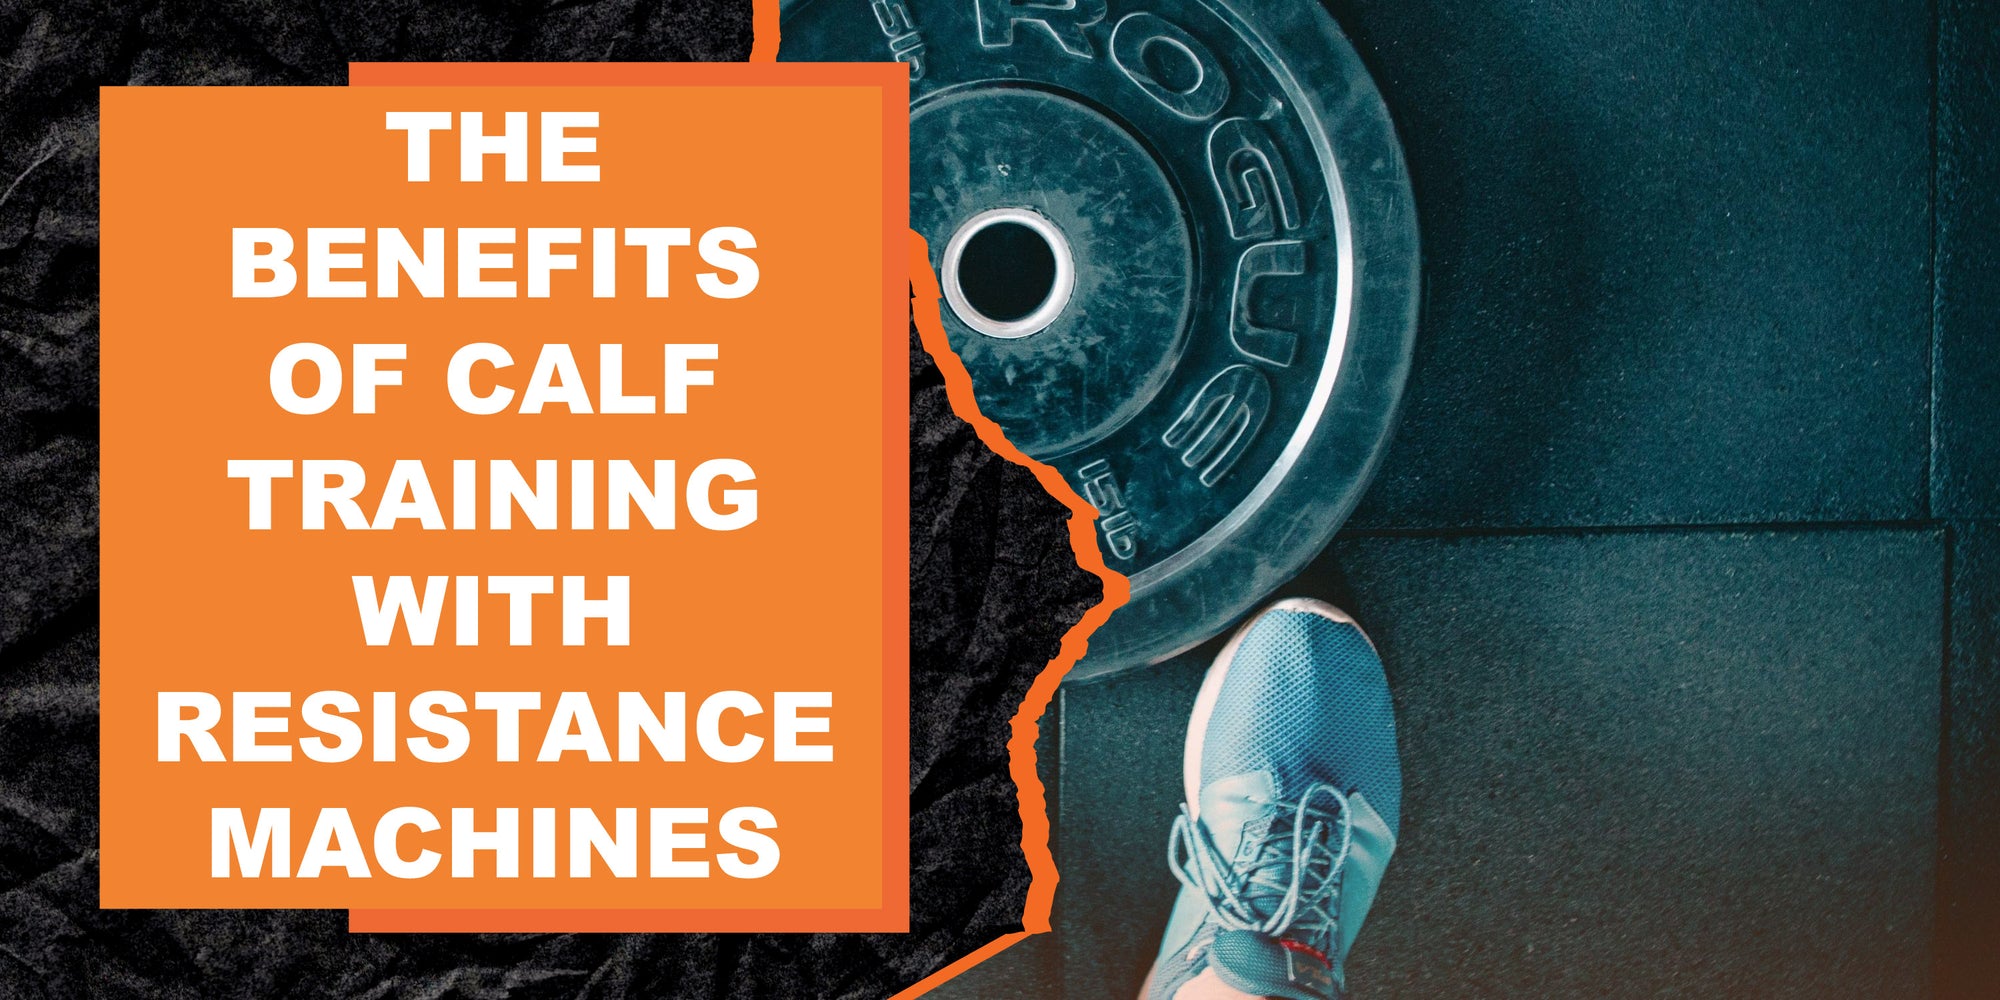 The Benefits of Calf Training with Resistance Machines